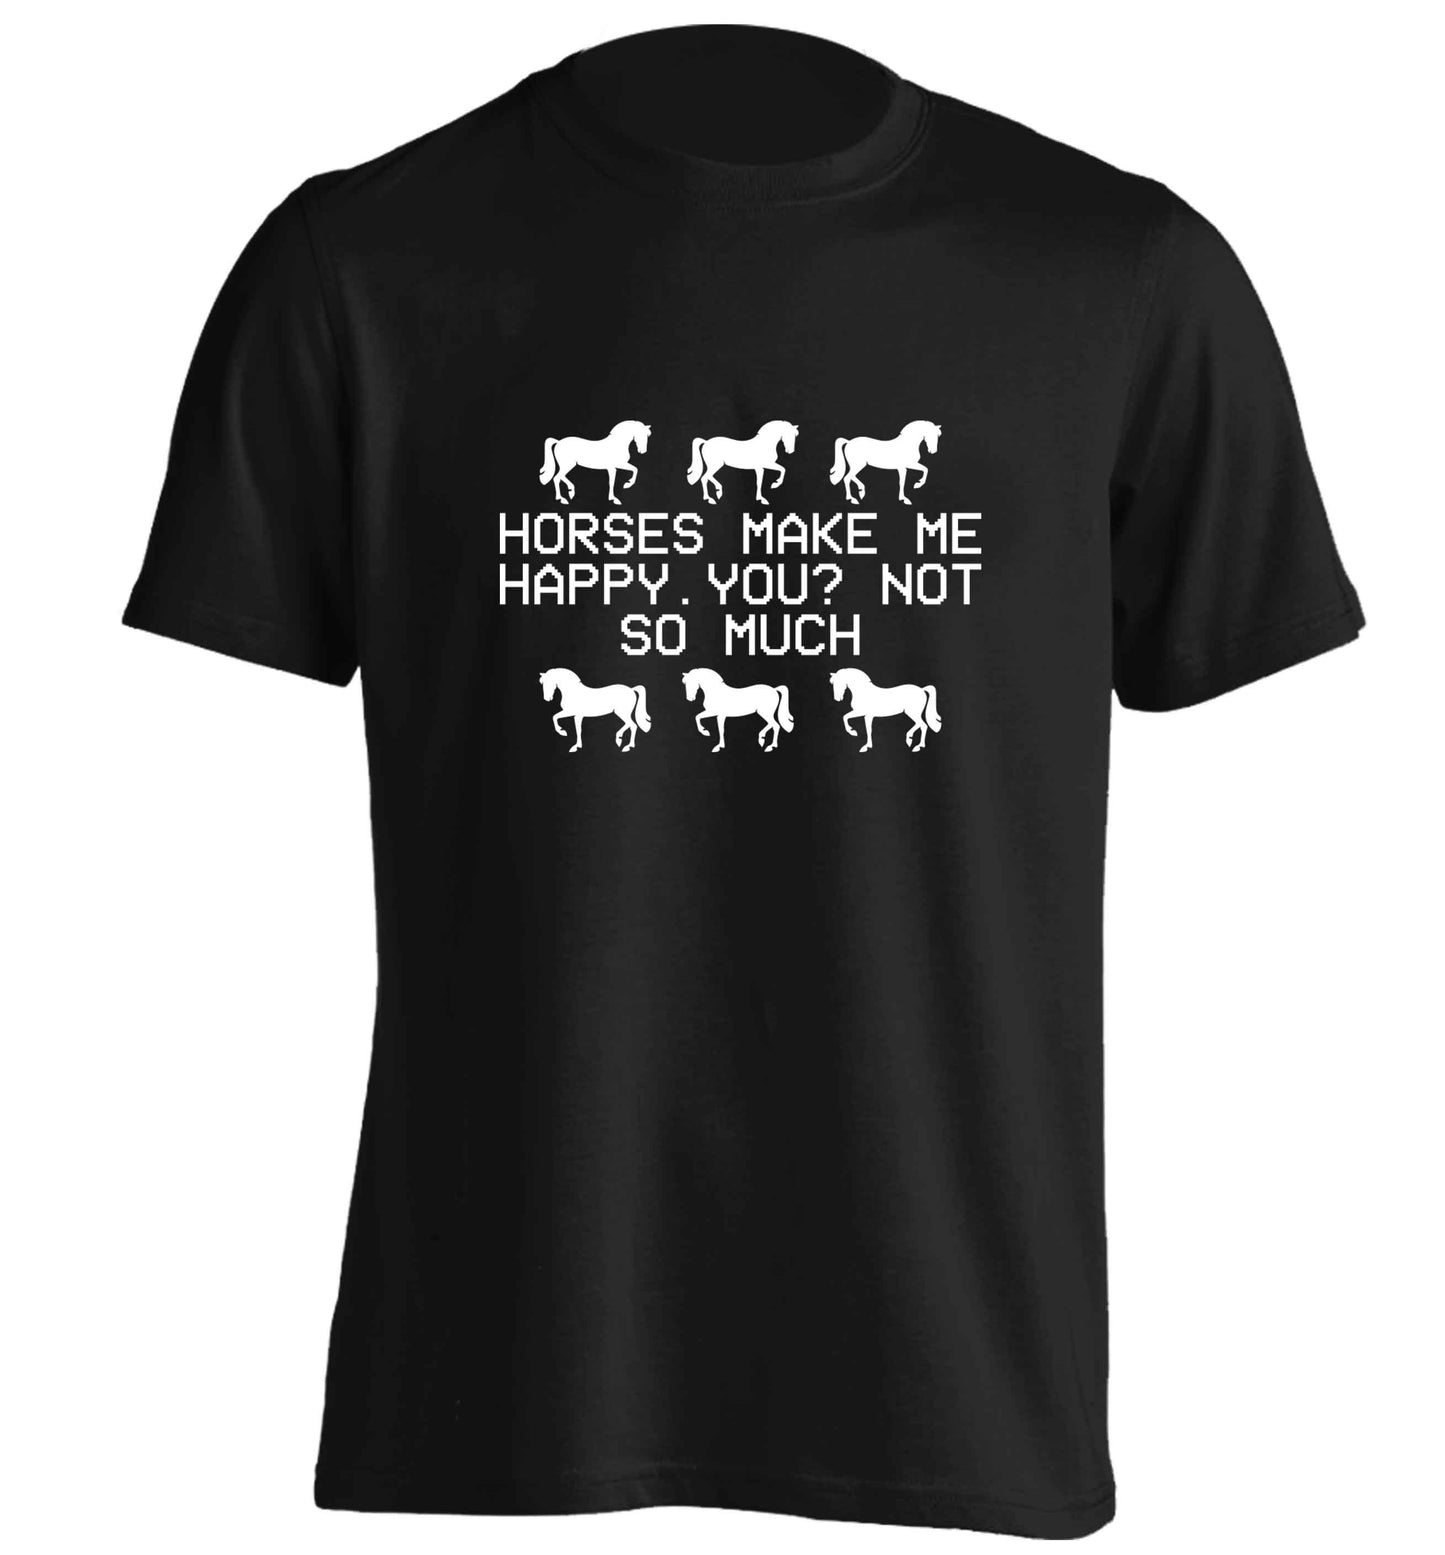 Horses make me happy, you not so much adults unisex black Tshirt 2XL